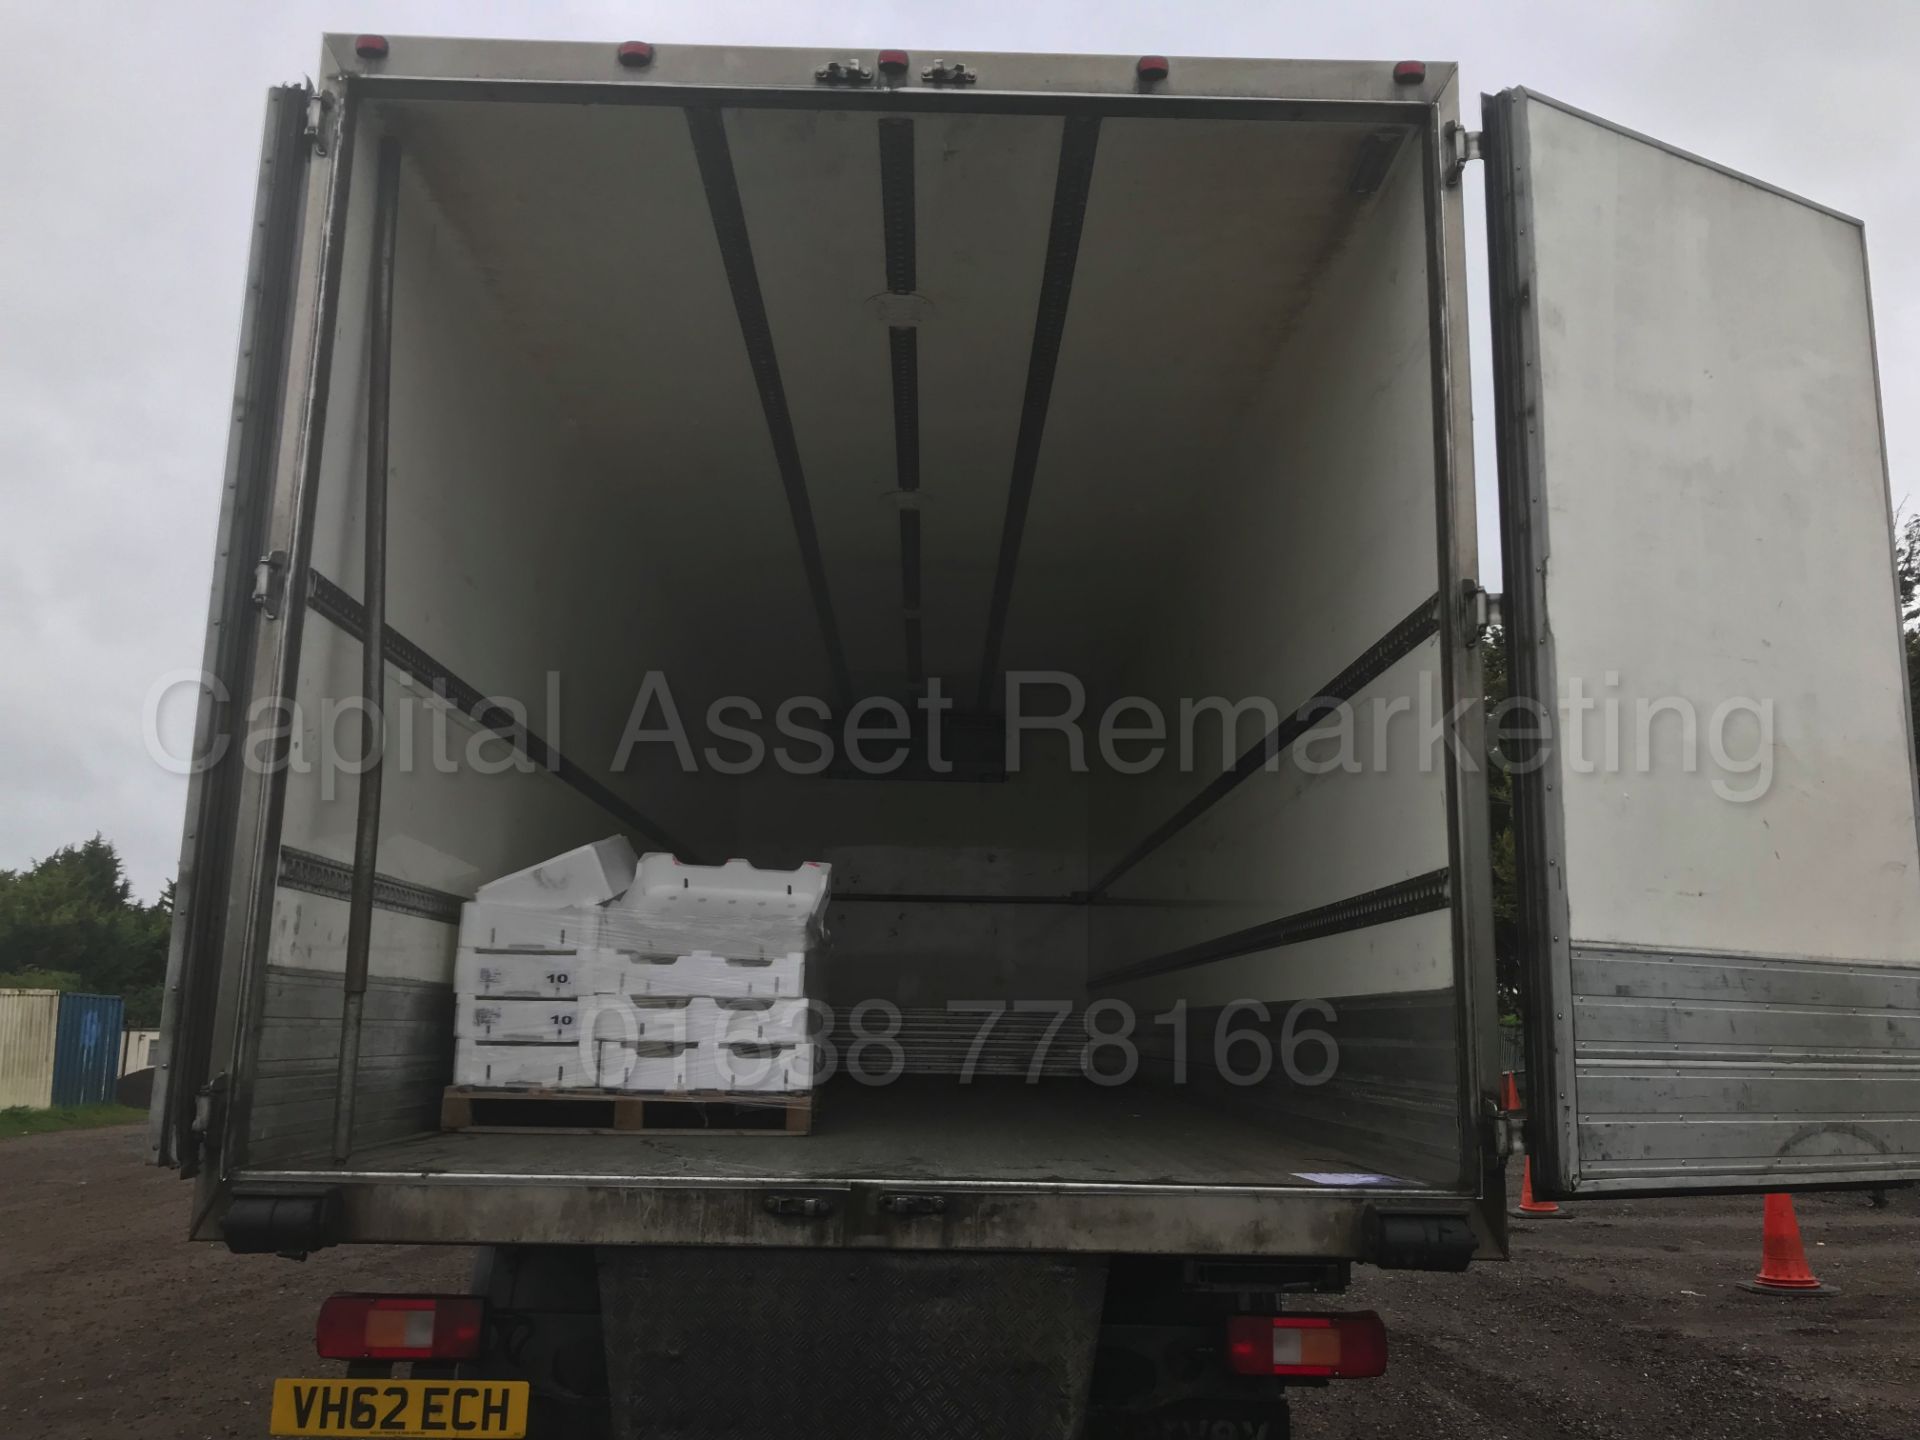 VOLVO ES260 '18 TONNE - REFRIGERATED TRUCK' *SLEEPER CAB* (2013 MODEL) '7L DIESEL - AUTOMATIC' - Image 15 of 32